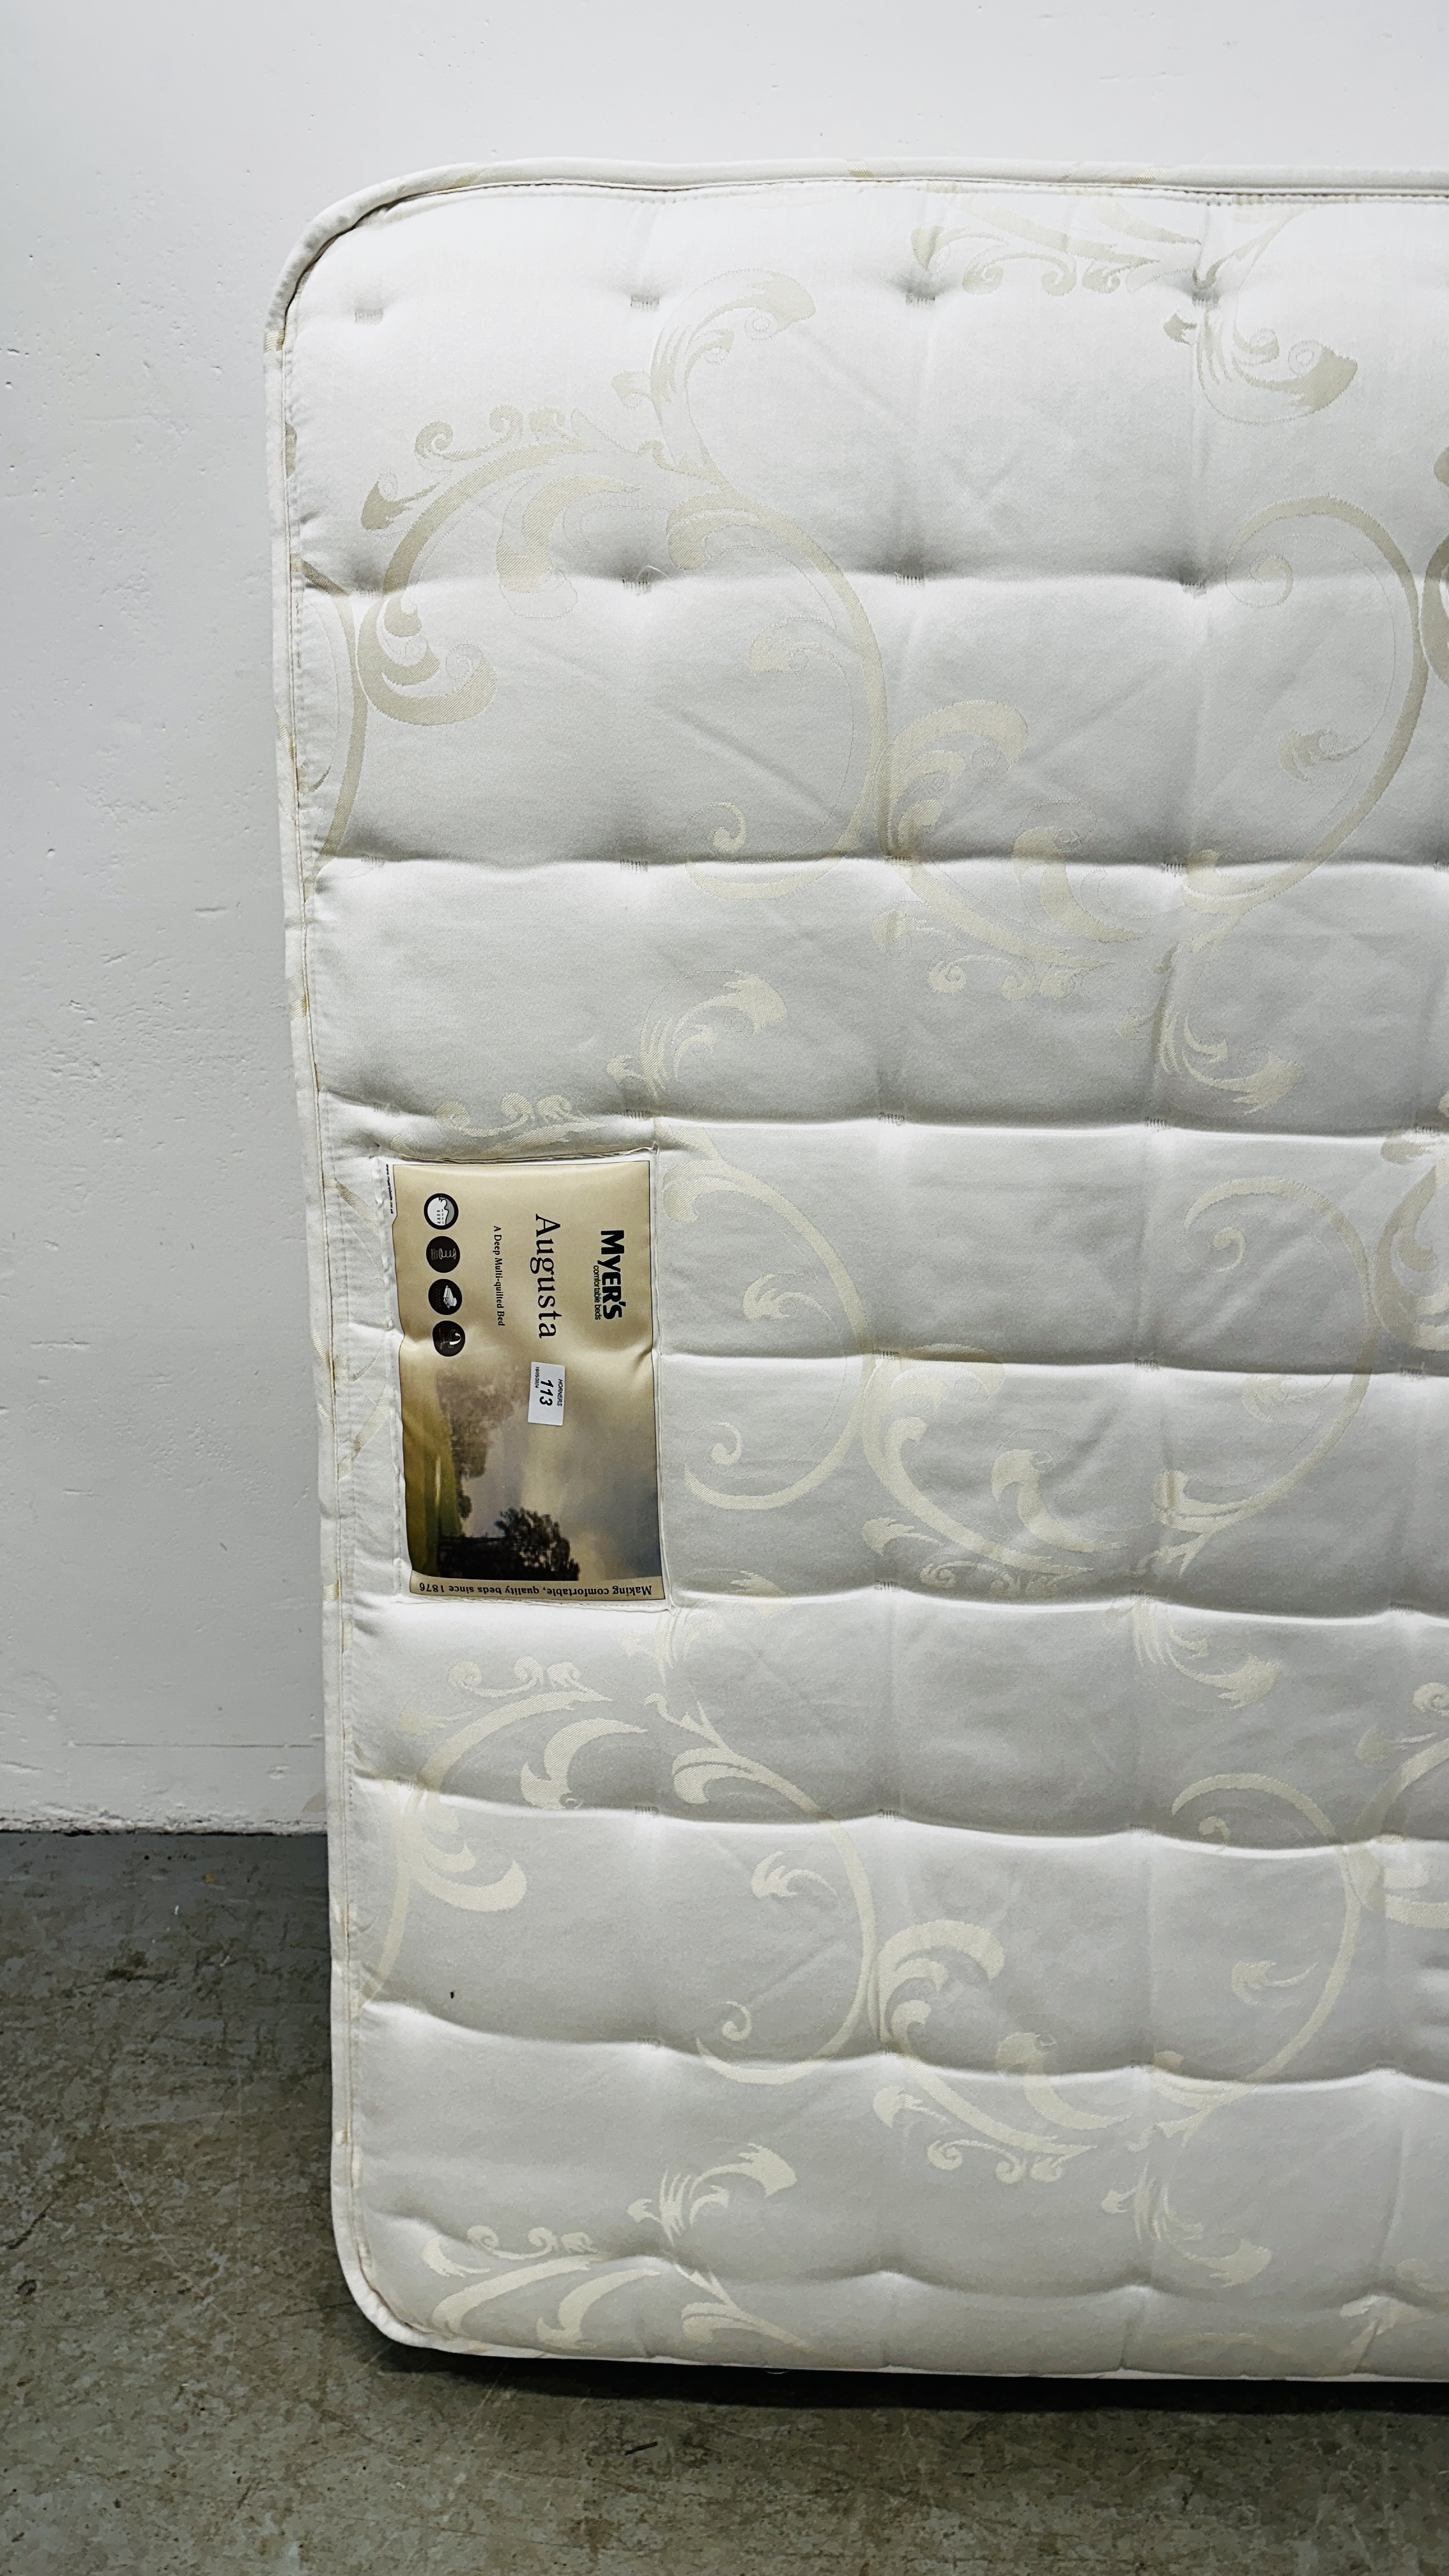 MYERS "AUGUSTA" DEEP QUILTED DOUBLE MATTRESS. - Image 2 of 10